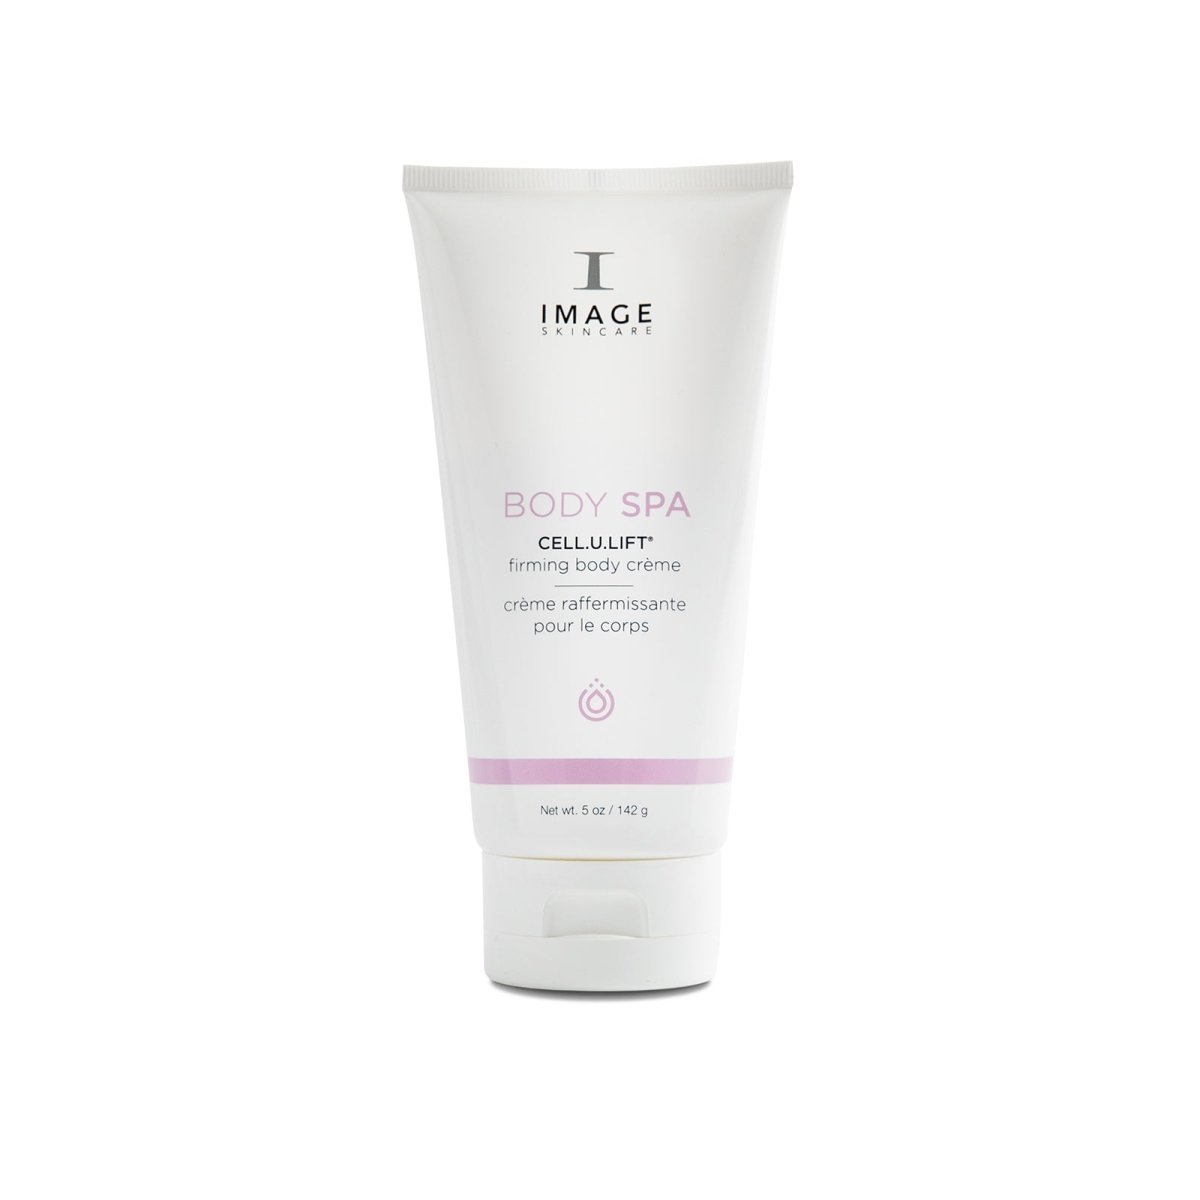 IMAGE Skincare Body Spa CELL.U.LIFT® Firming Body Crème